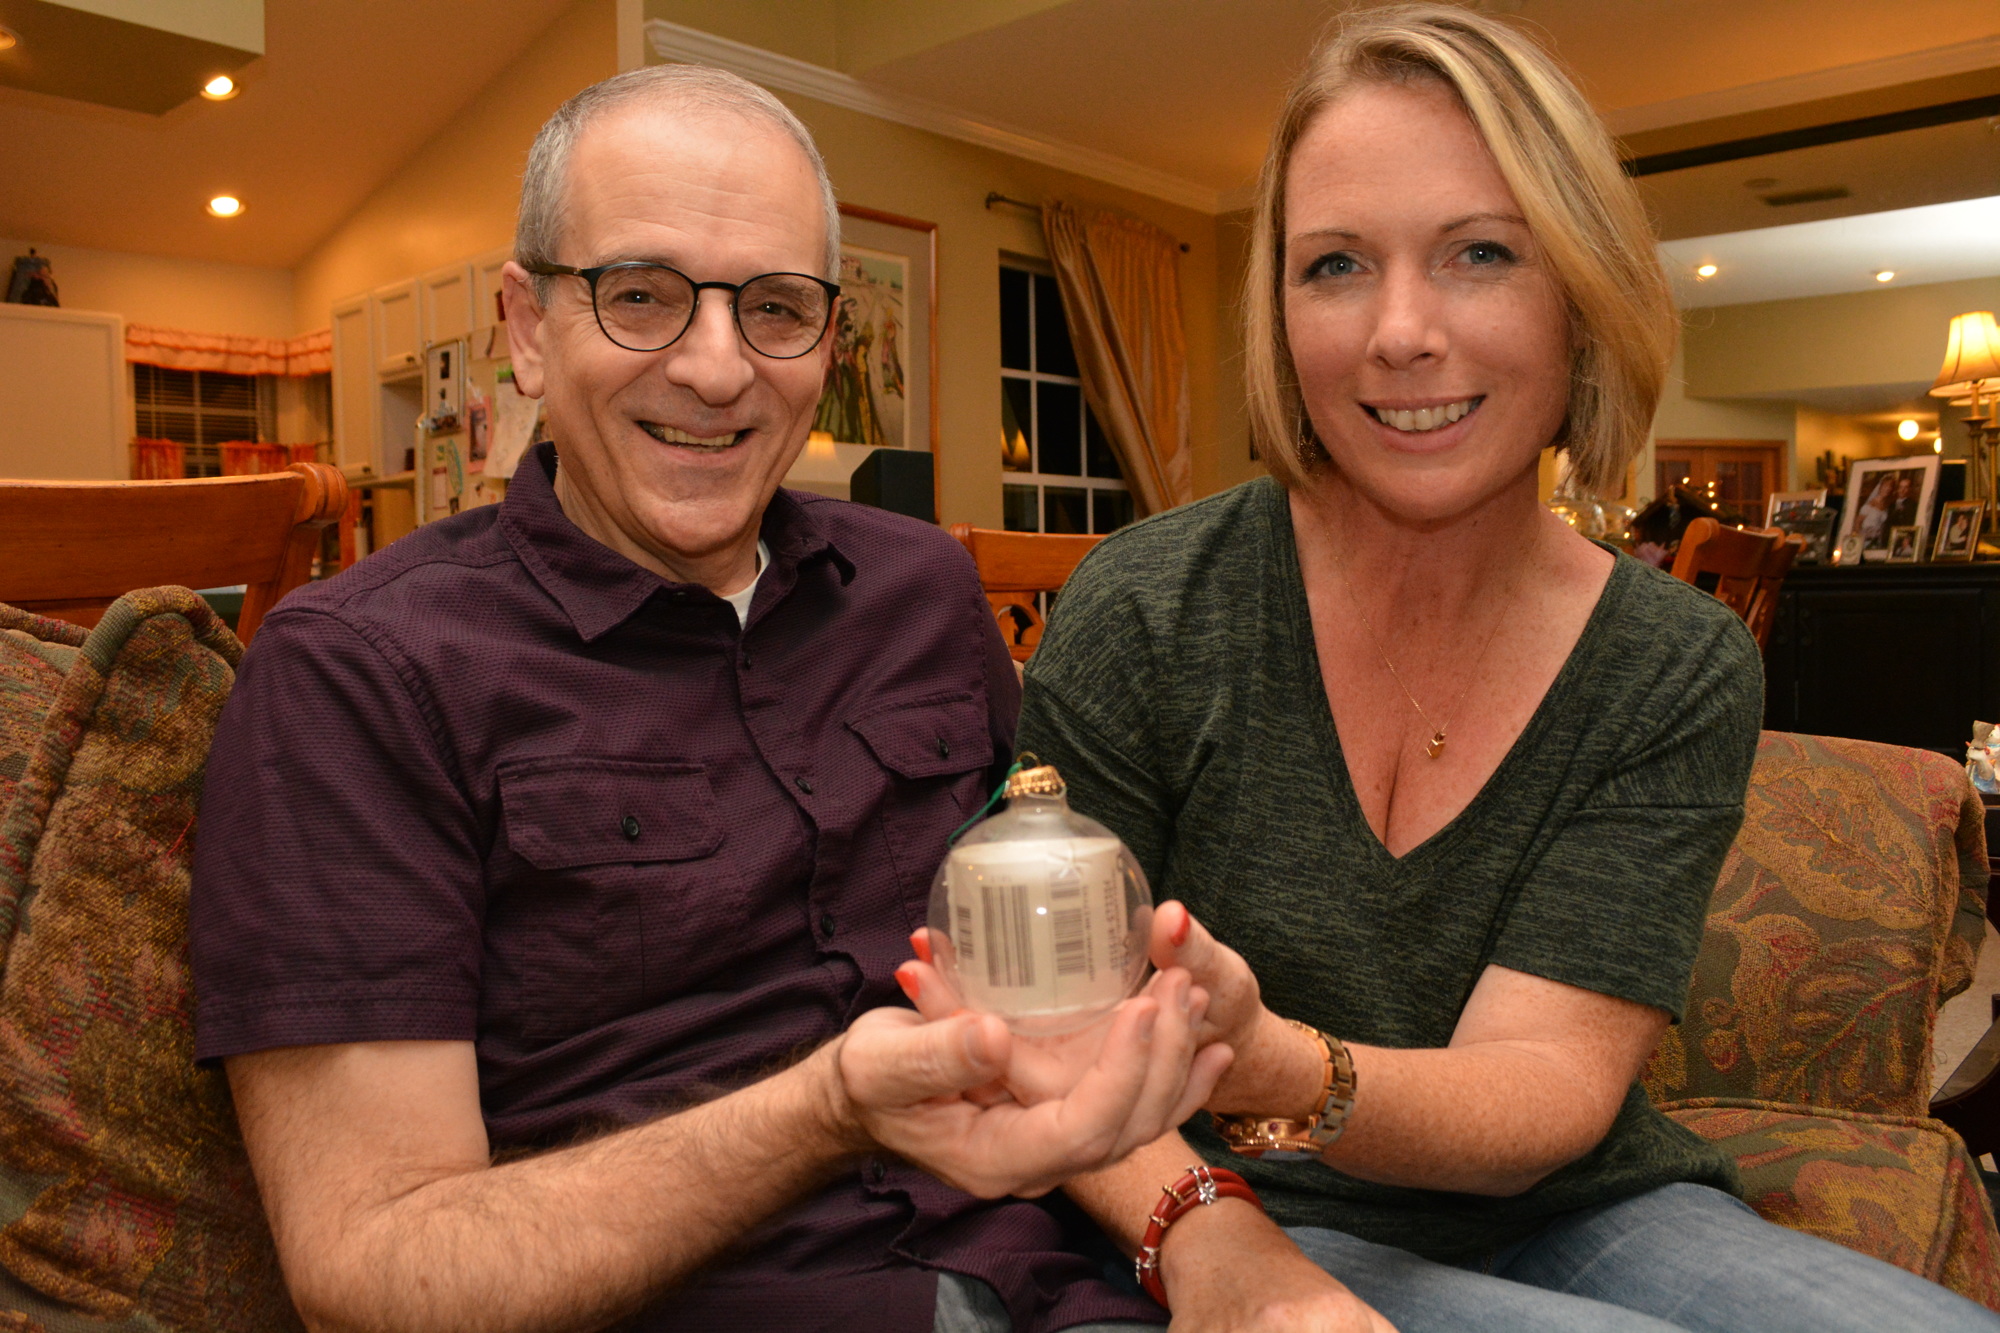 Tony Dertouzos and his wife, Amity Hoffman, say the baggage tag inside this ornament originally looked like a cigarette because it was rolled so tightly to fit inside. Over time, it has expanded. Photo by Pam Eubanks.